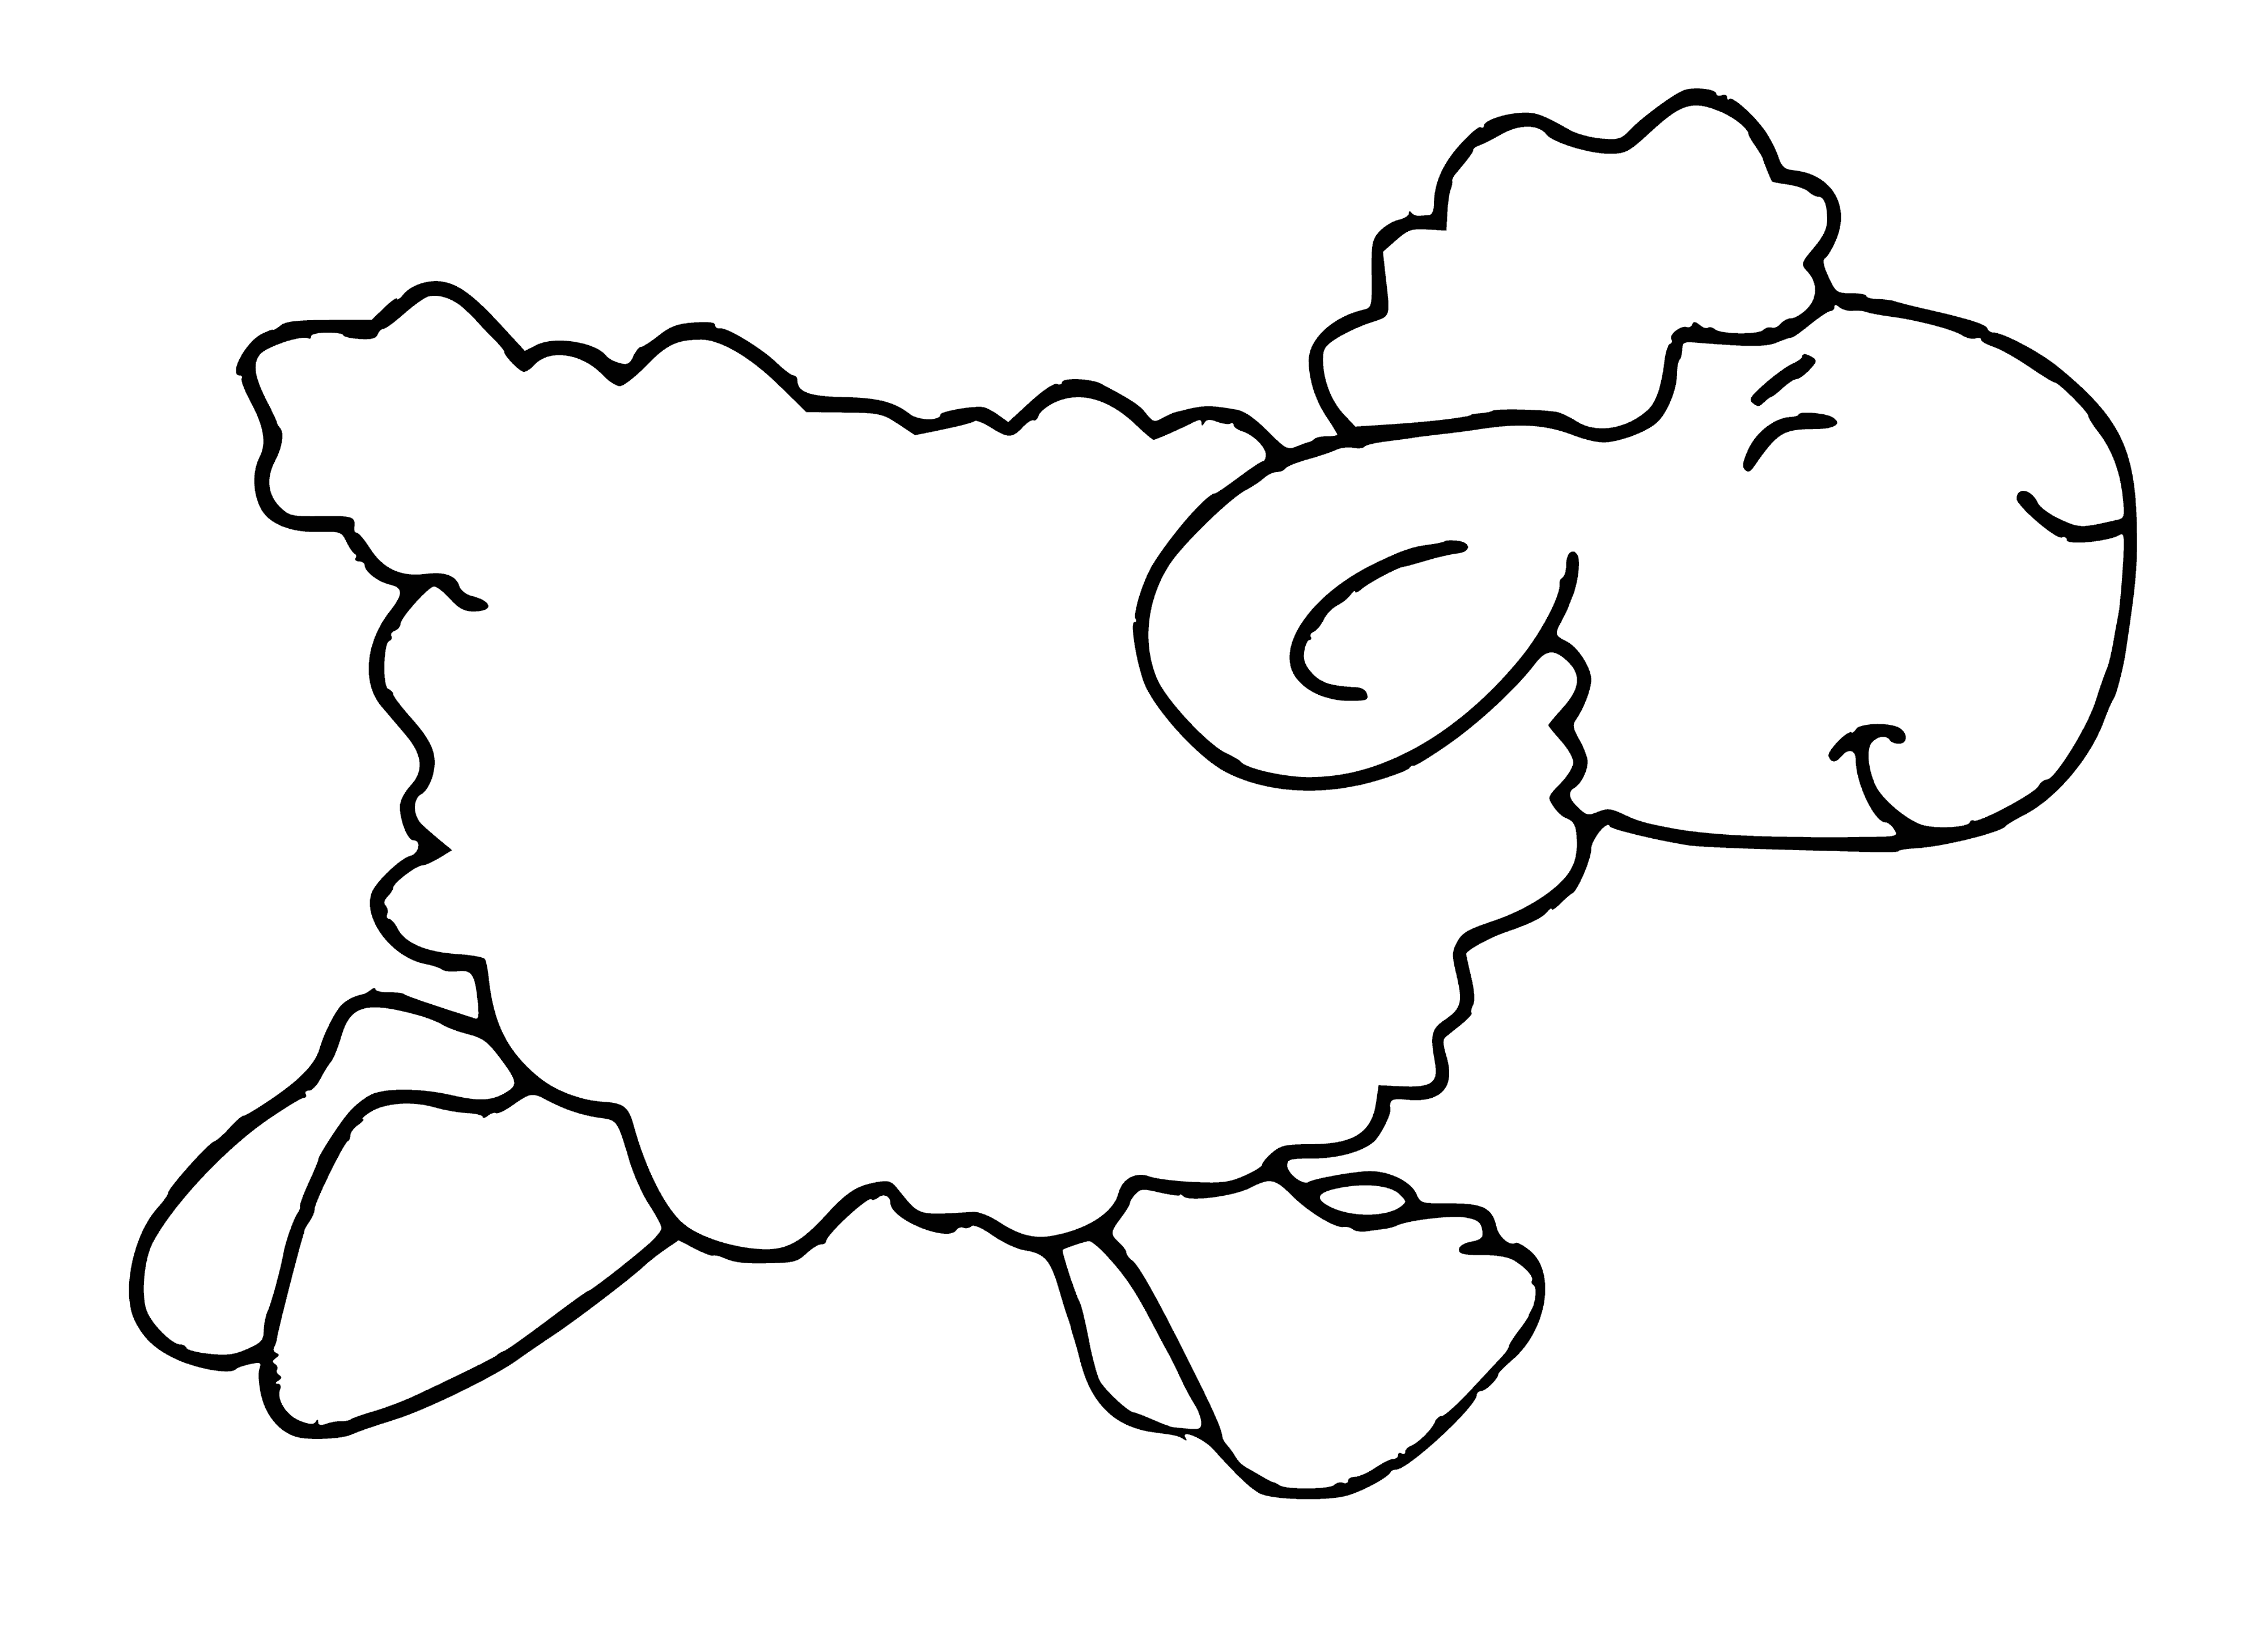 coloring page: A lamb stands on a hill, white with black spots, nose & hooves.